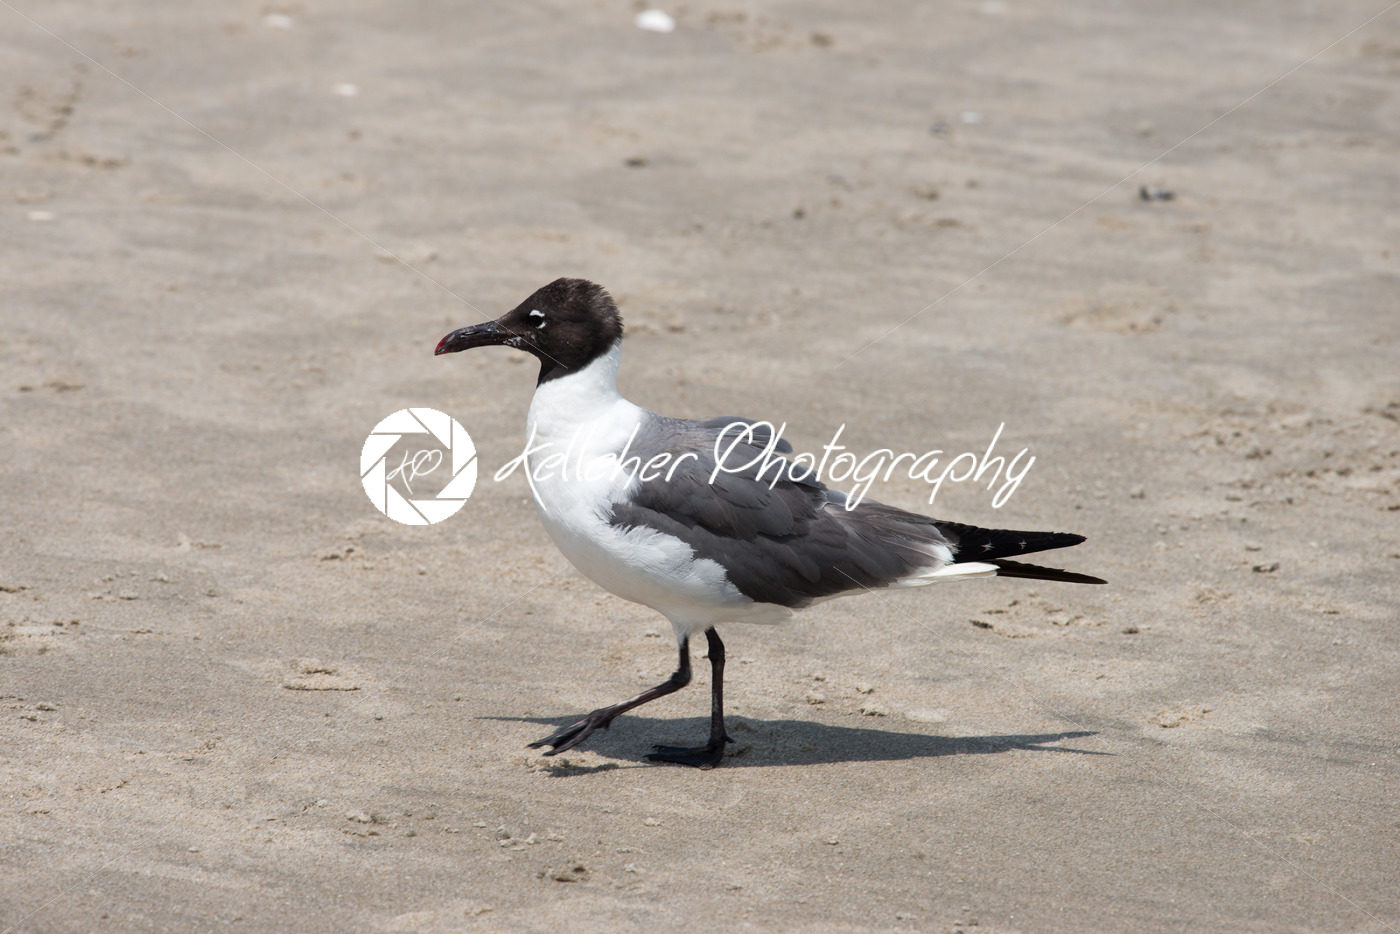 Seagull walking along on the beach - Kelleher Photography Store